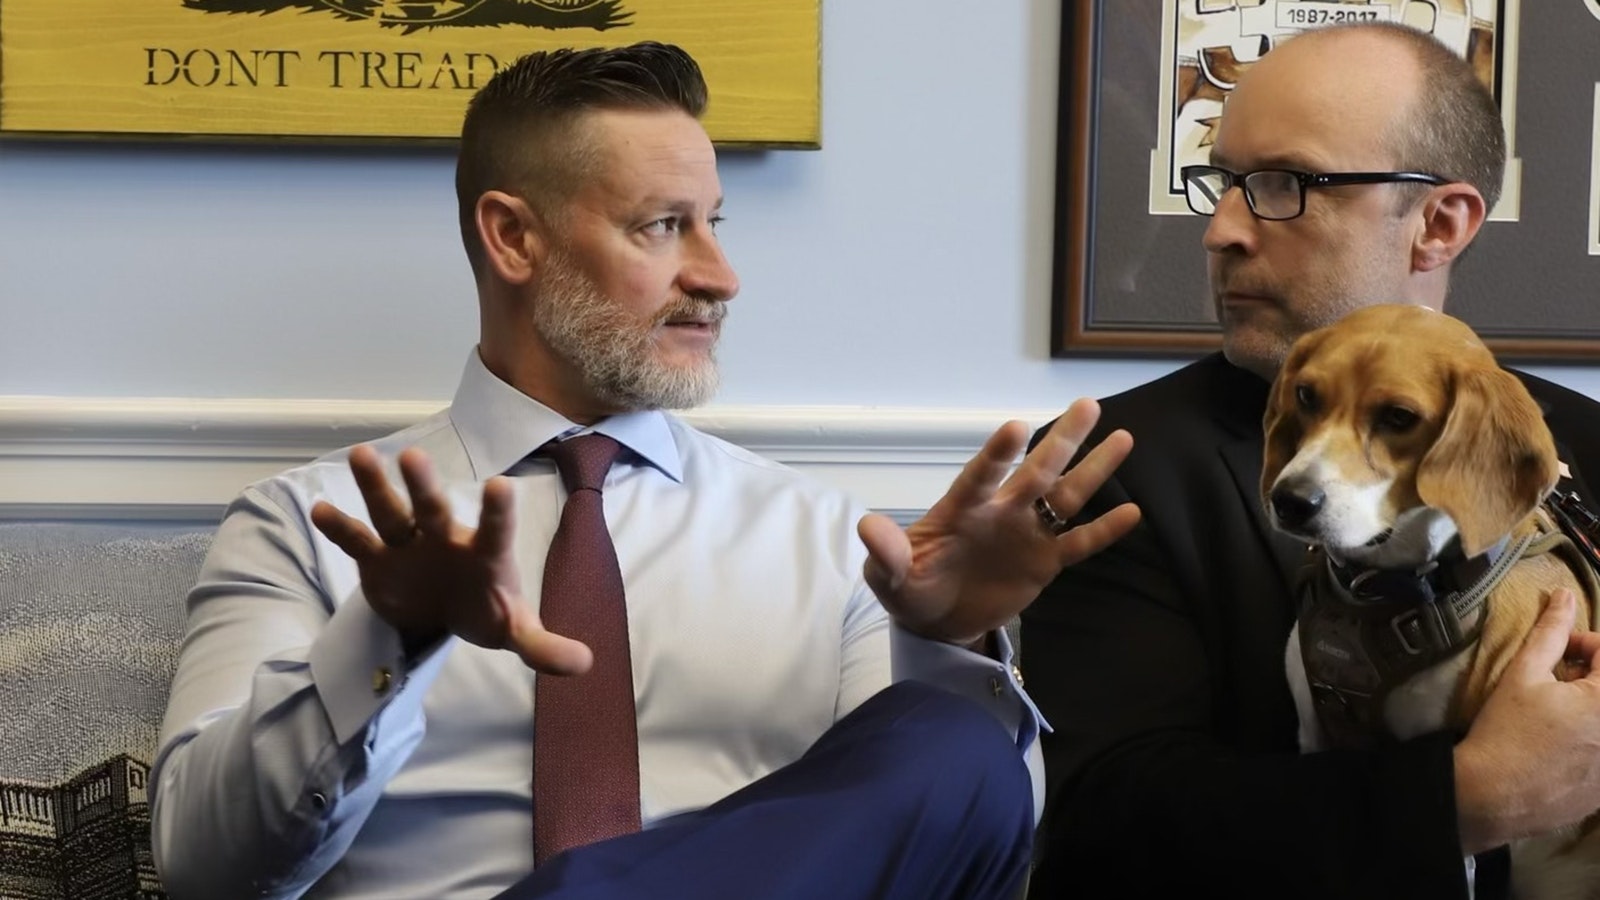 Kindness Ranch Executive Director John Ramer bonds with Florida Republican Congressman Greg Steube over their shared passion for saving rescue animals.